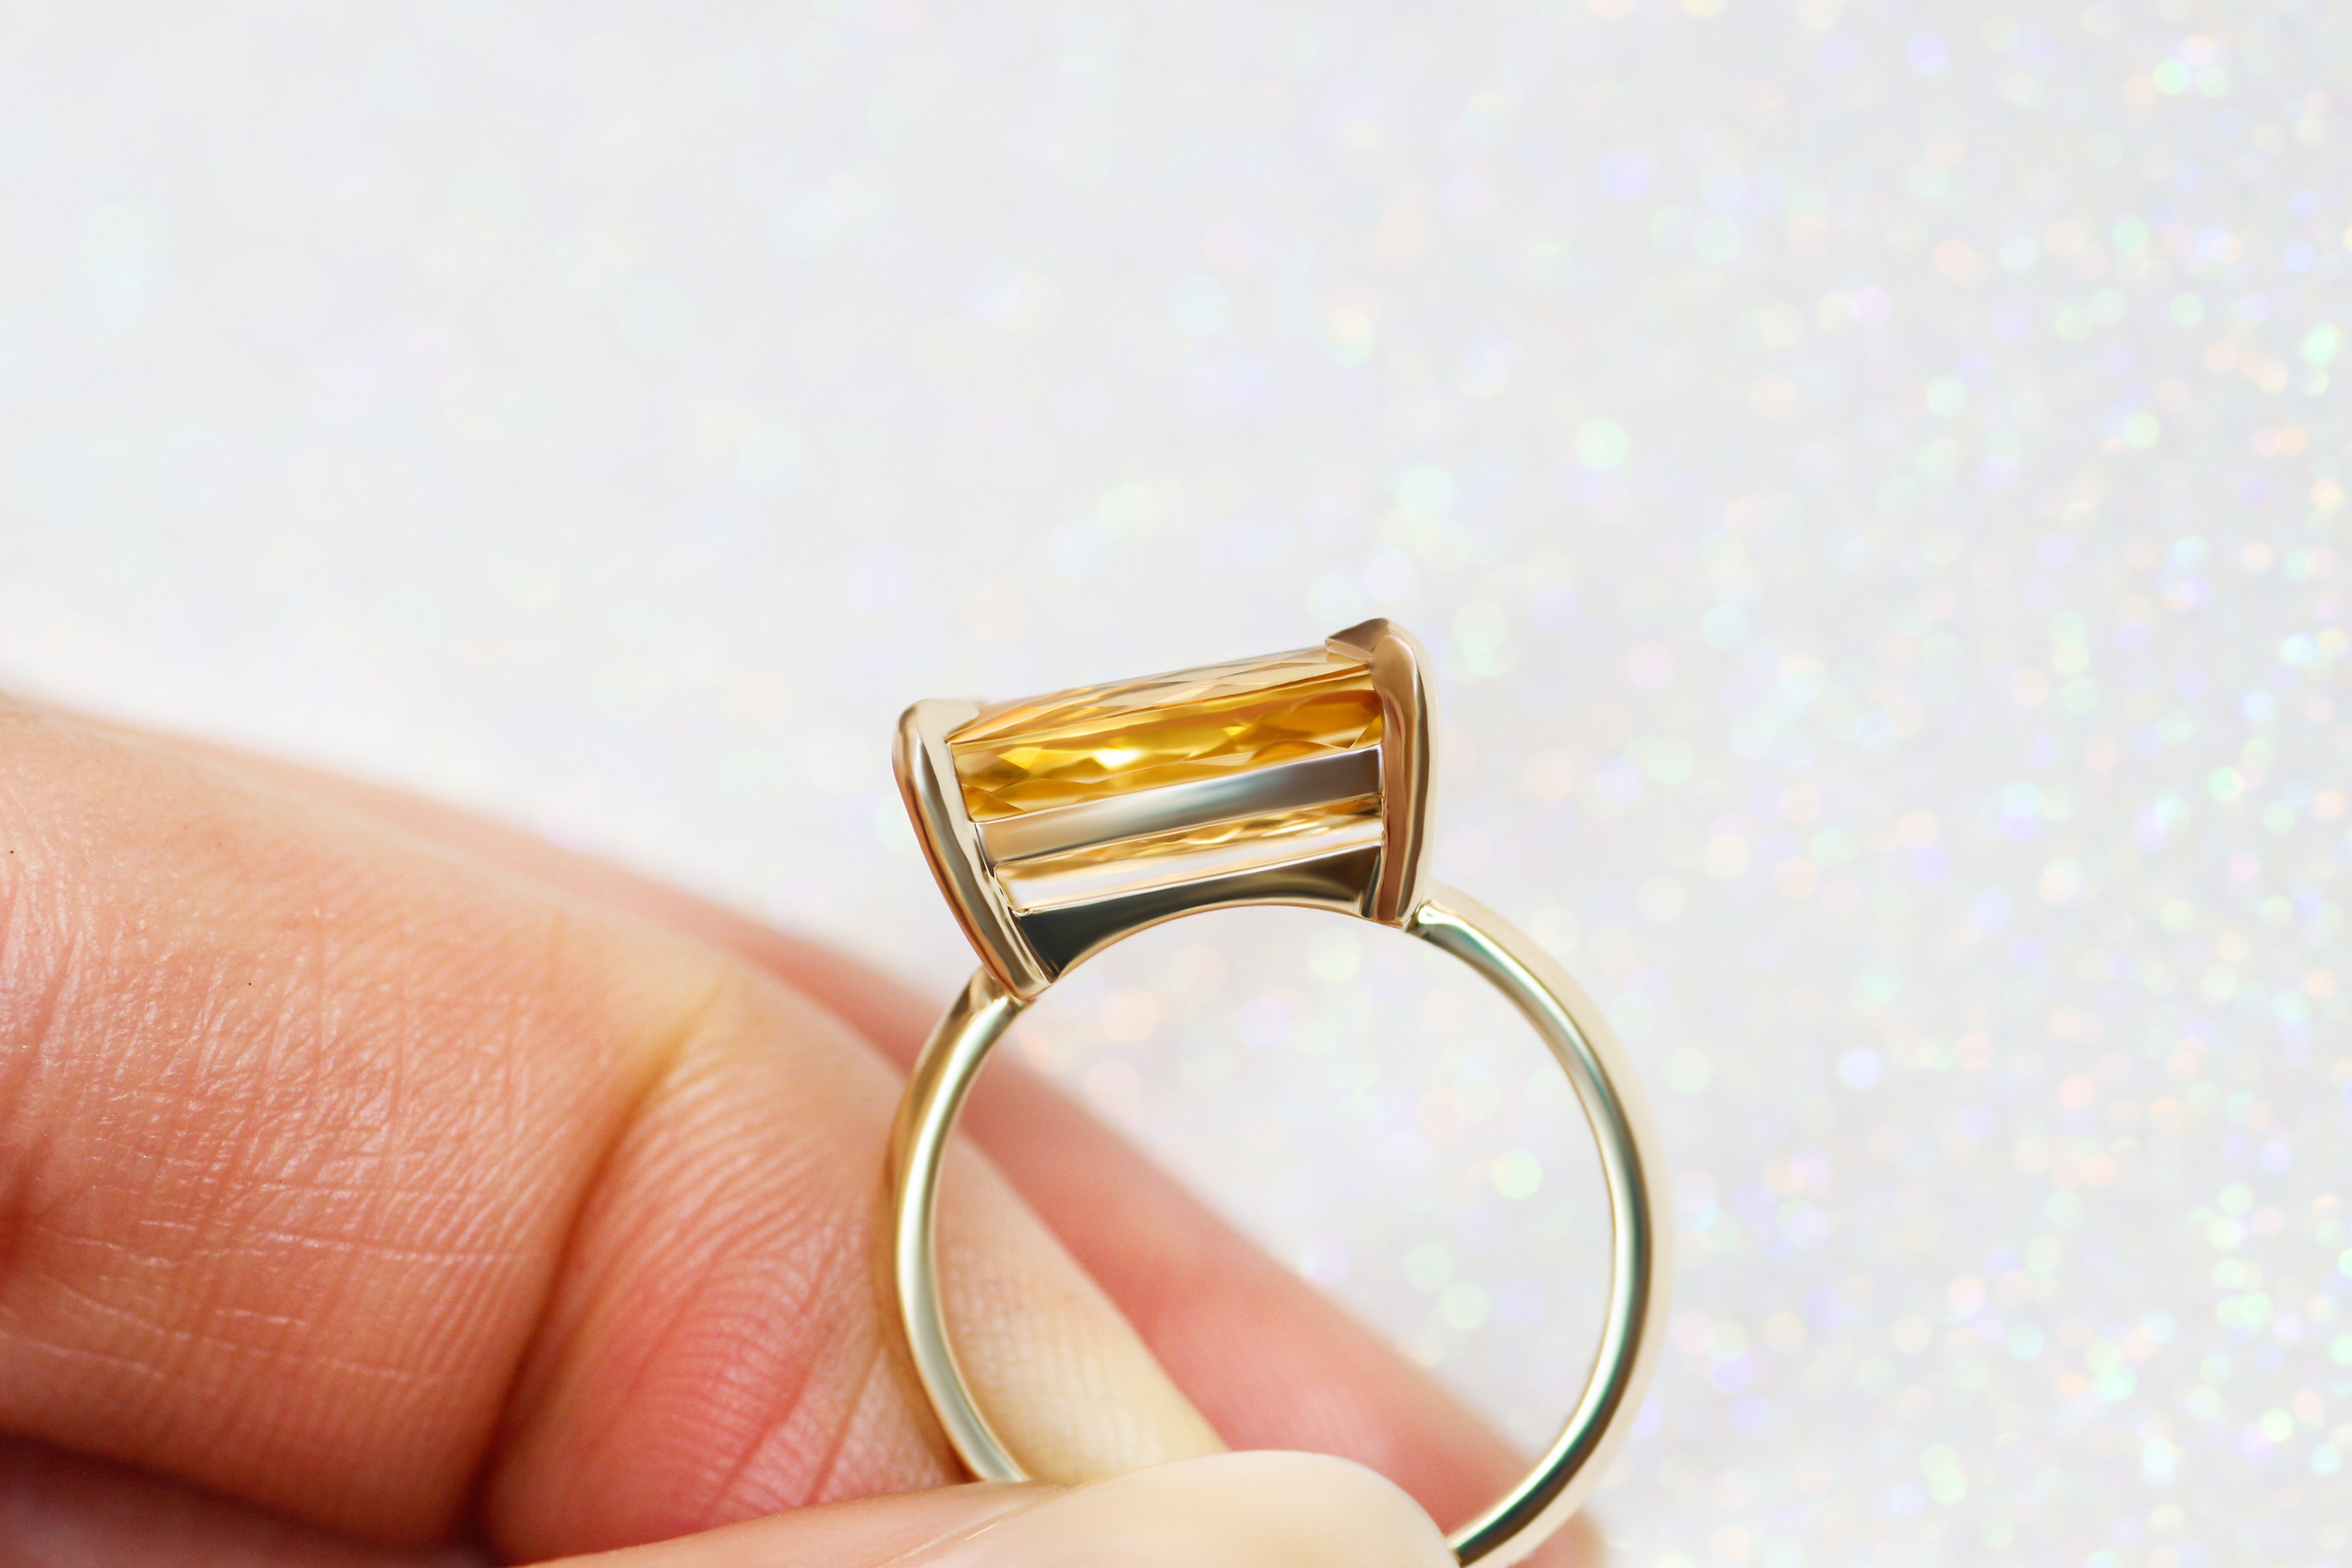 Front view of Olivia + Raymundo's custom ring by Goldpoint Jewelry in Greenpoint, Brooklyn.